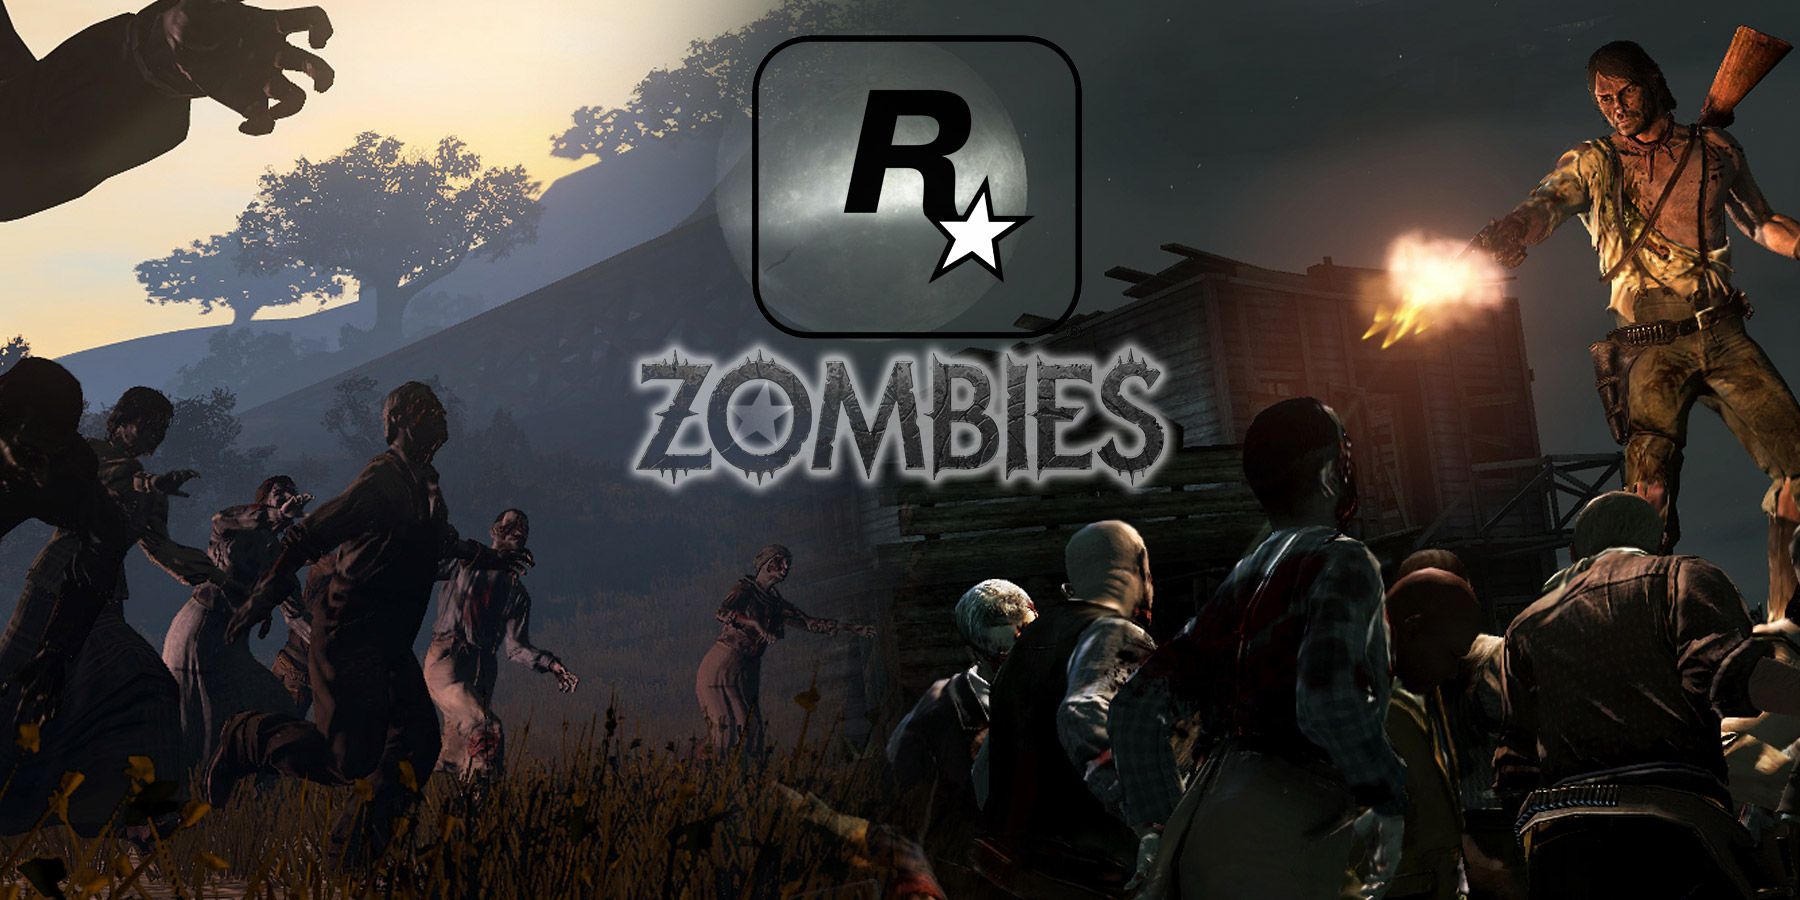 New details on Rockstar Games' Agent and Zombie cancelled games